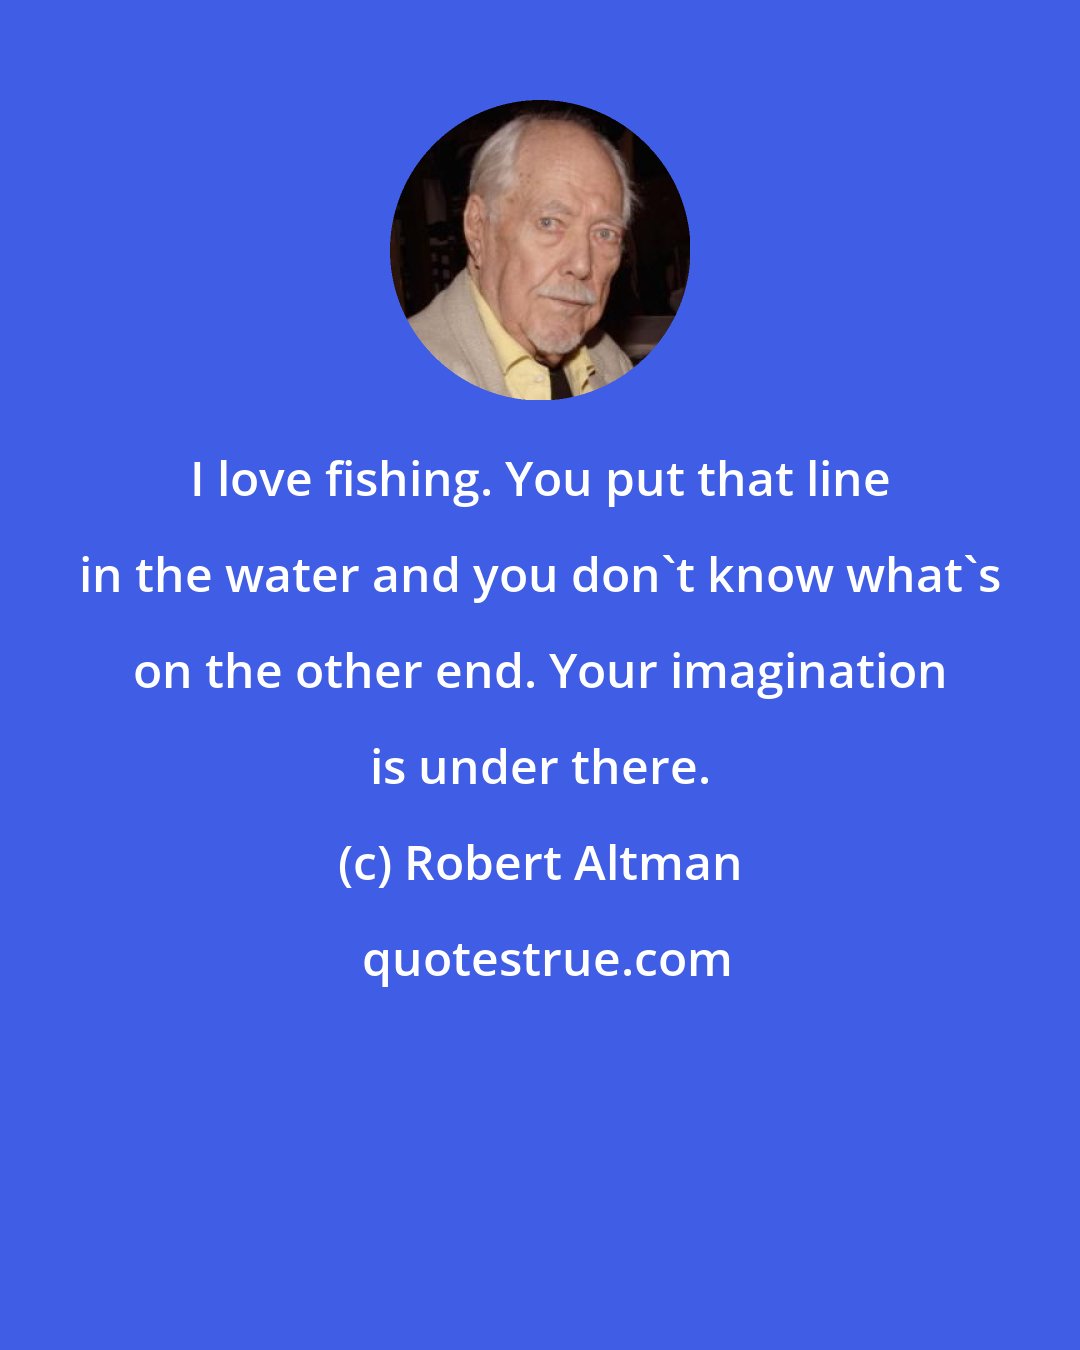 Robert Altman: I love fishing. You put that line in the water and you don't know what's on the other end. Your imagination is under there.